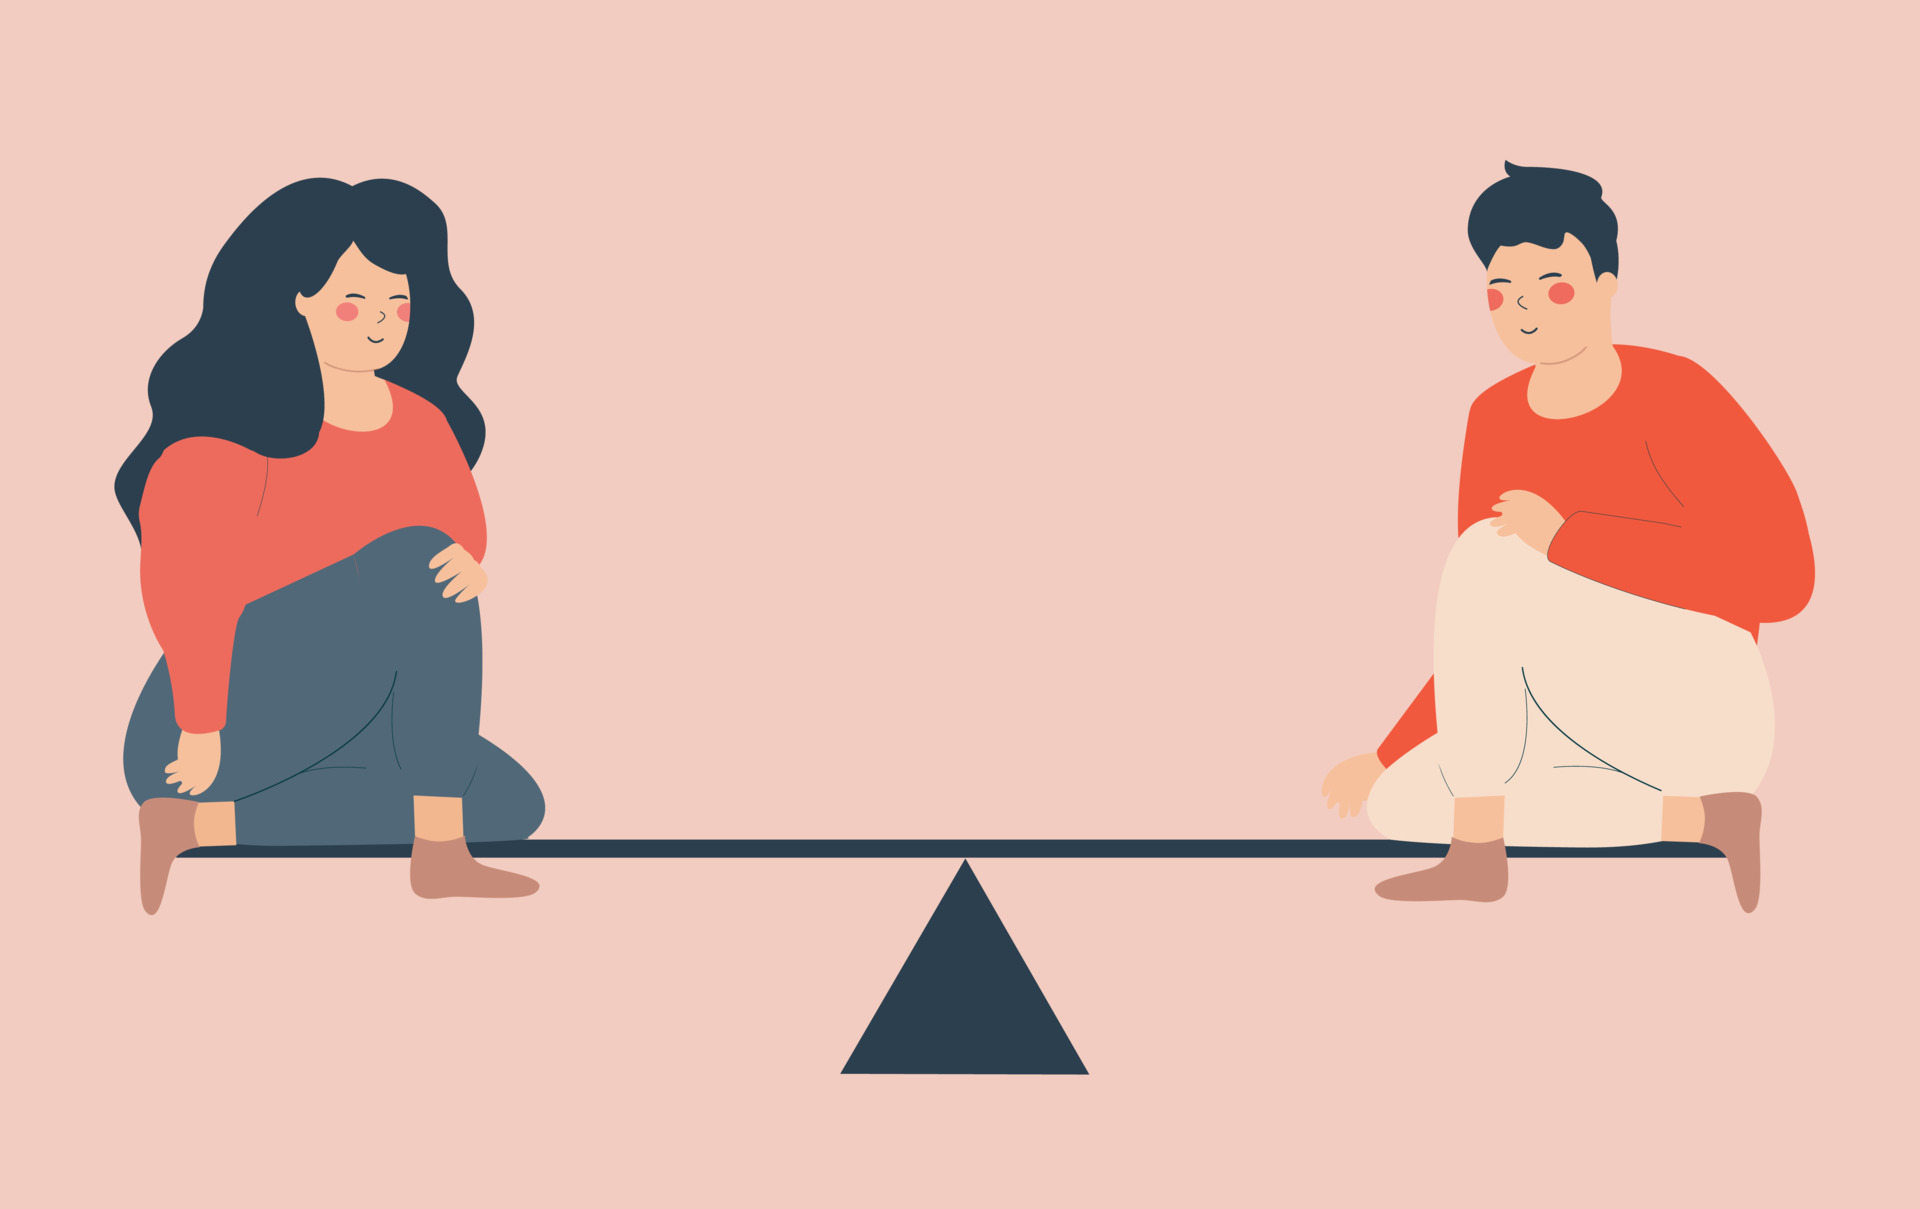 Man and woman character sitting a weight scale showing sign equal weight and value in society. Concept of equality based on the skills and knowledge. Vector illustration 10769928 Vector